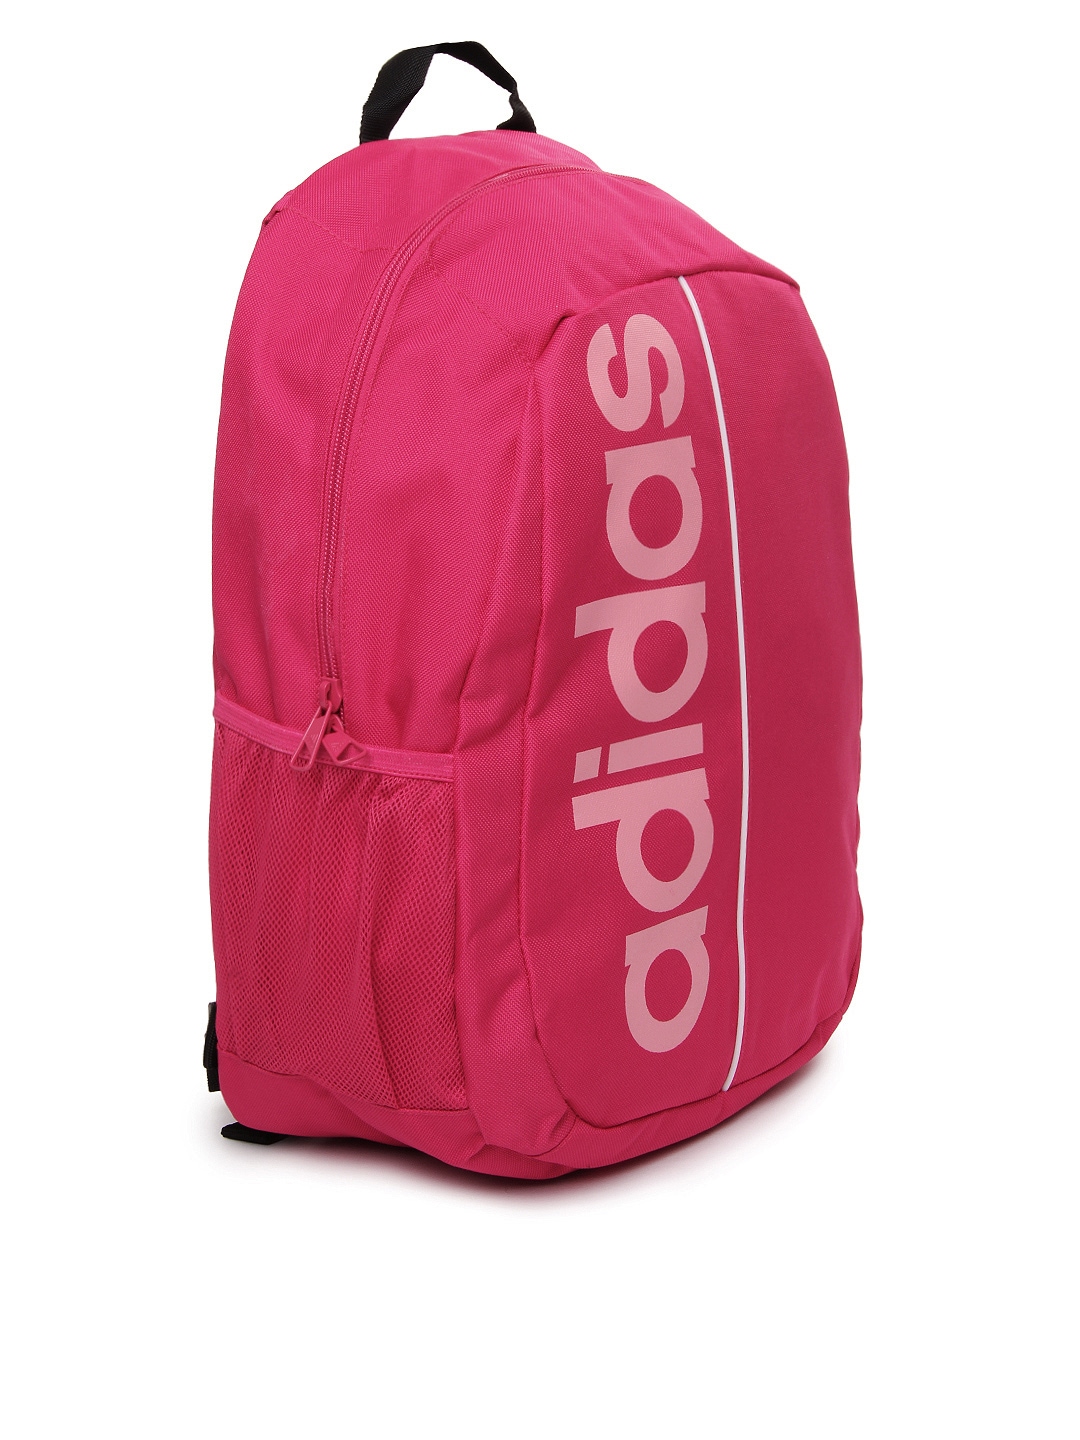 Backpack Online Store India | IUCN Water